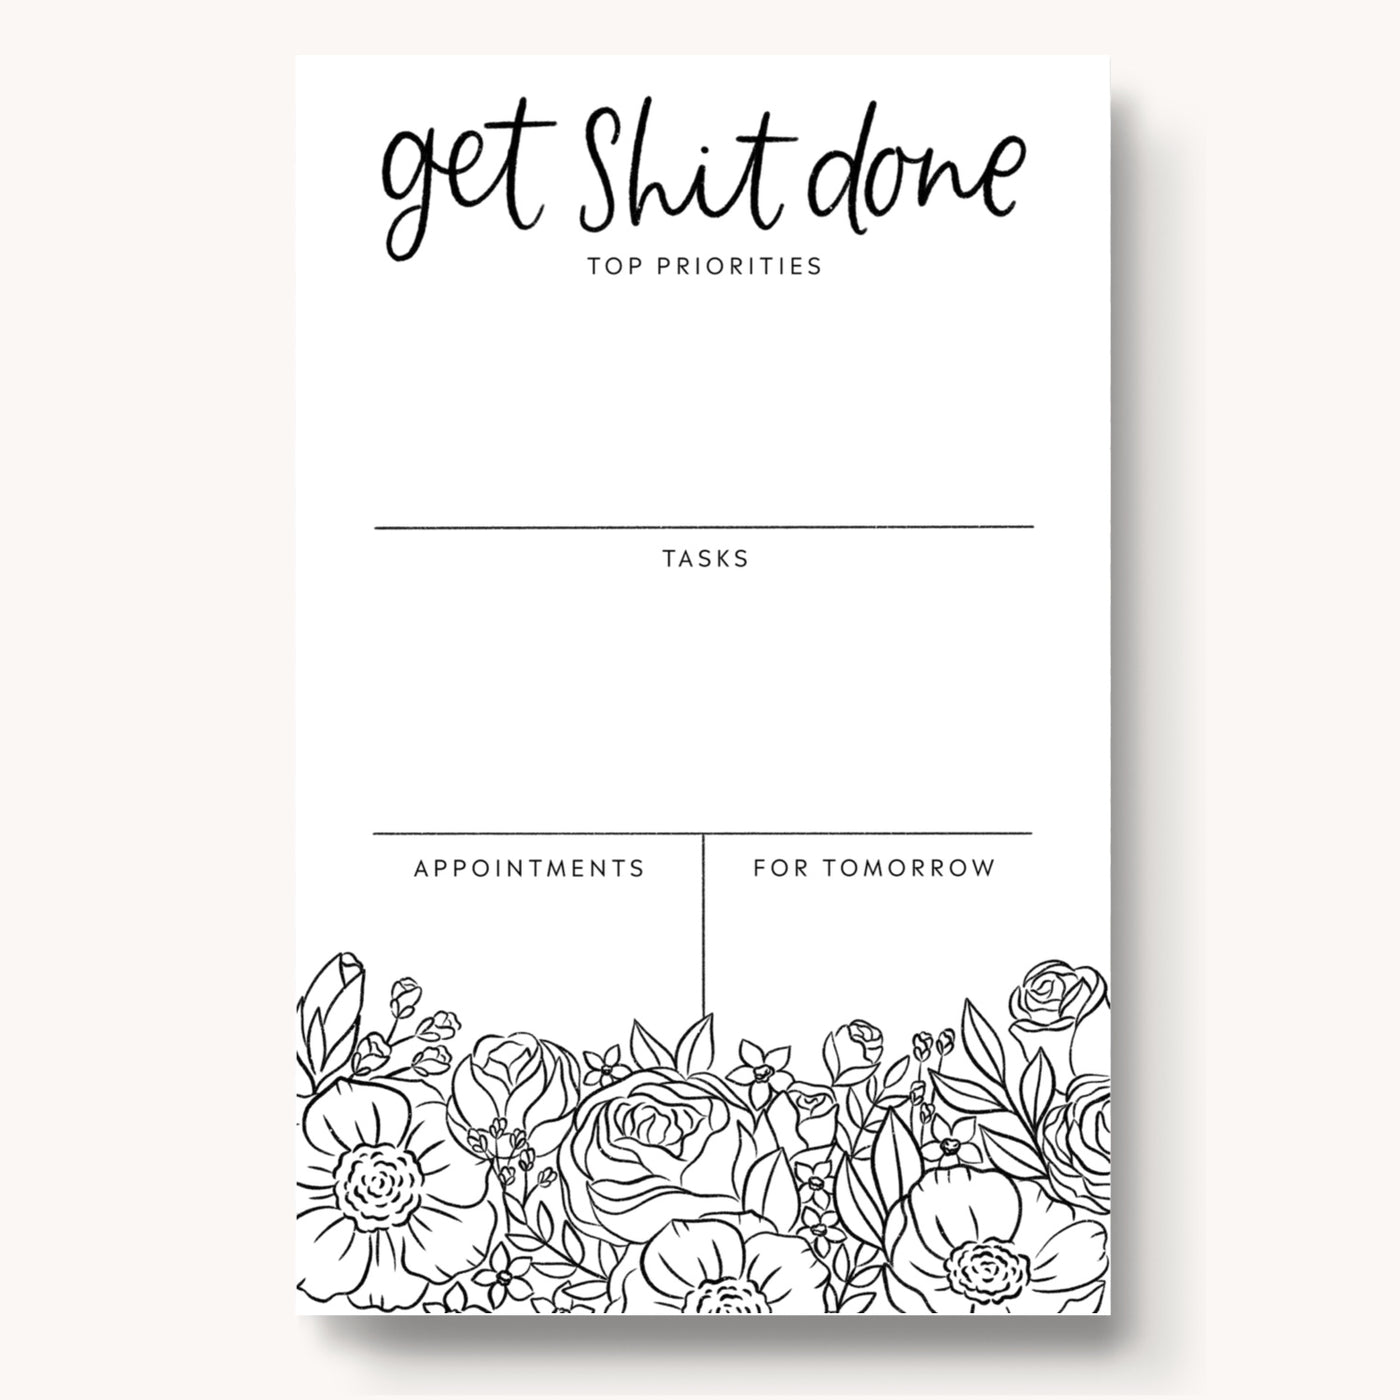 Daily Planner Notepad, 8.5x5.5"